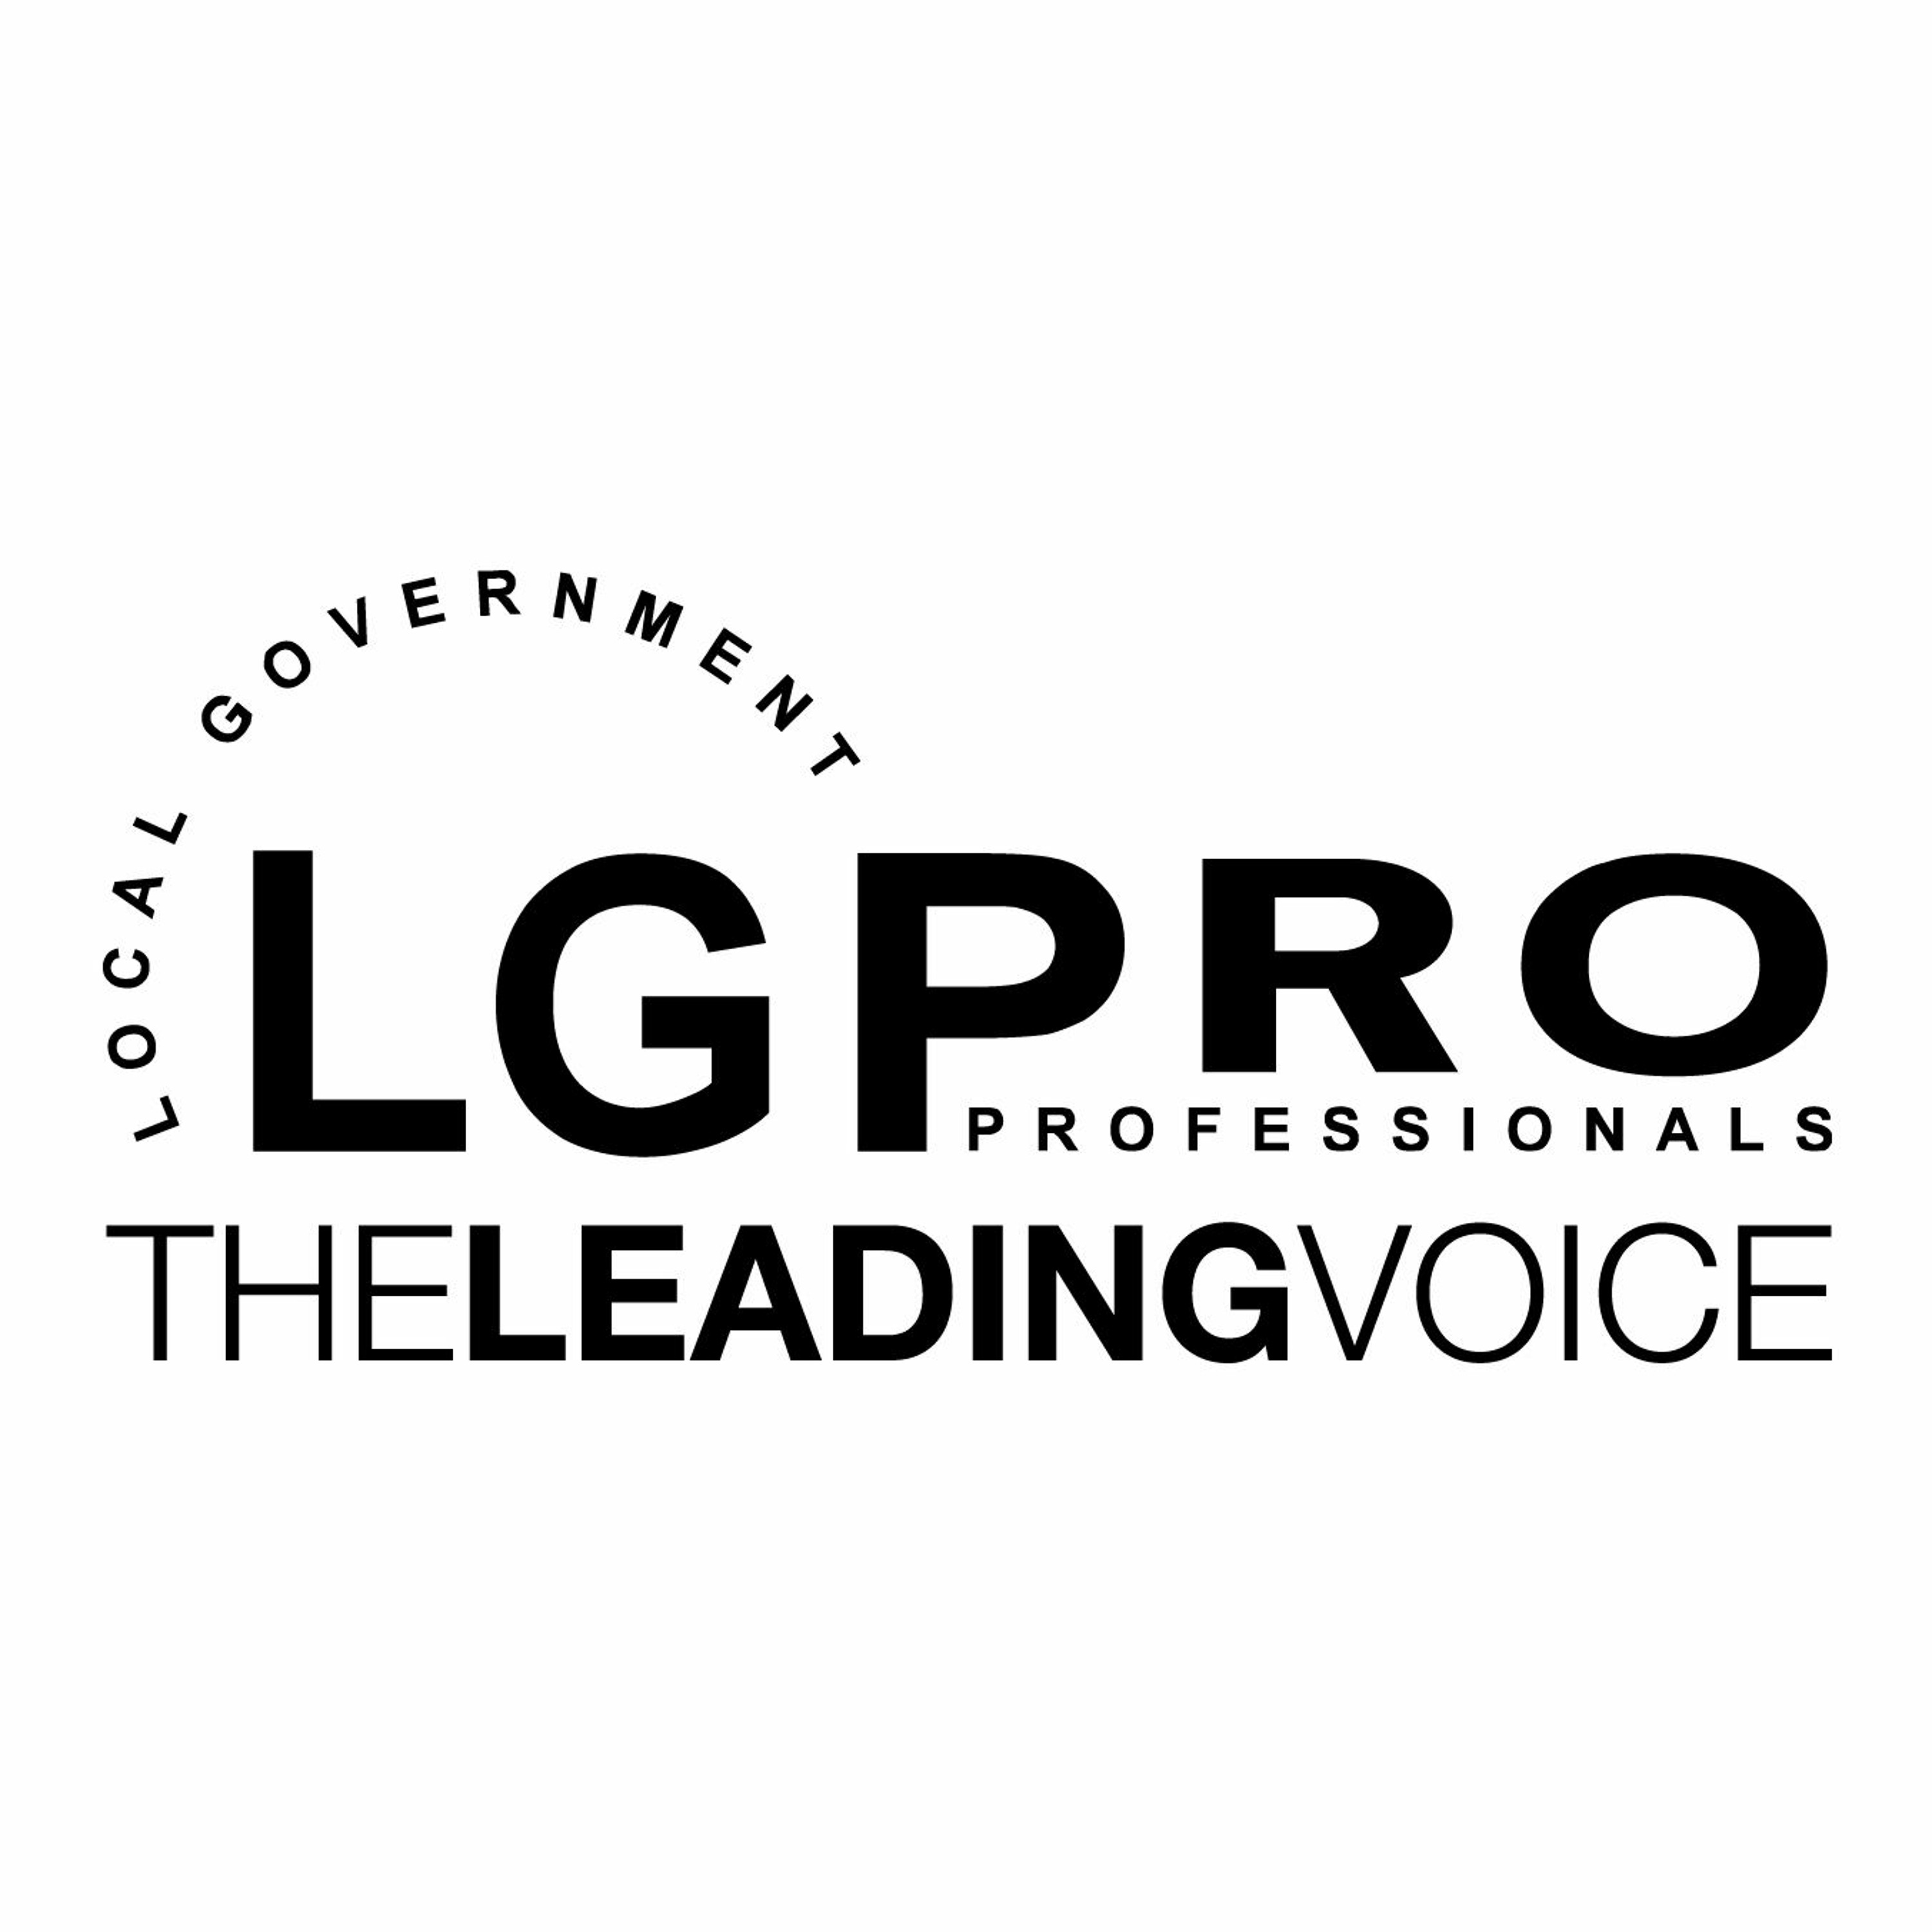 LGProcast - Episode 4 - Where Are The Environmental Health Officers?